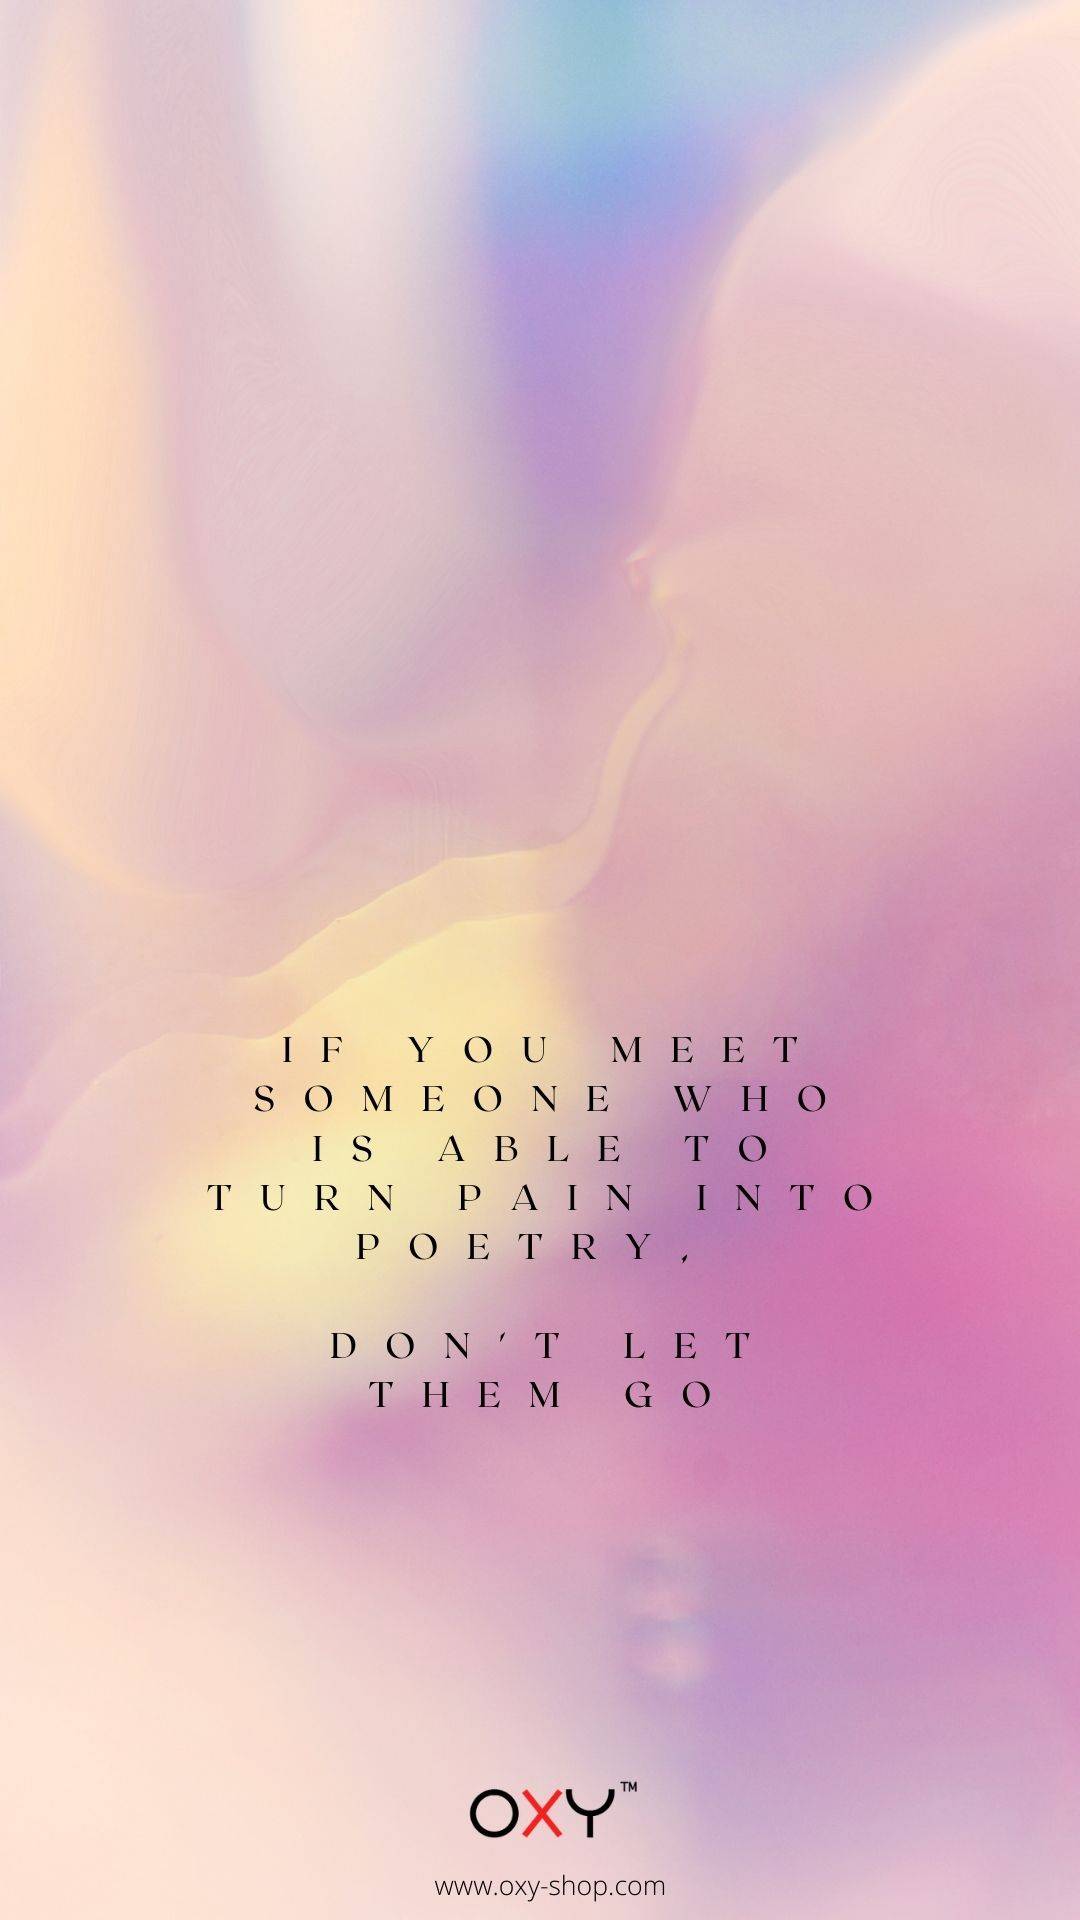 If you meet someone who is able to turn pain into poetry, do not let them go. - BDSM wallpaper